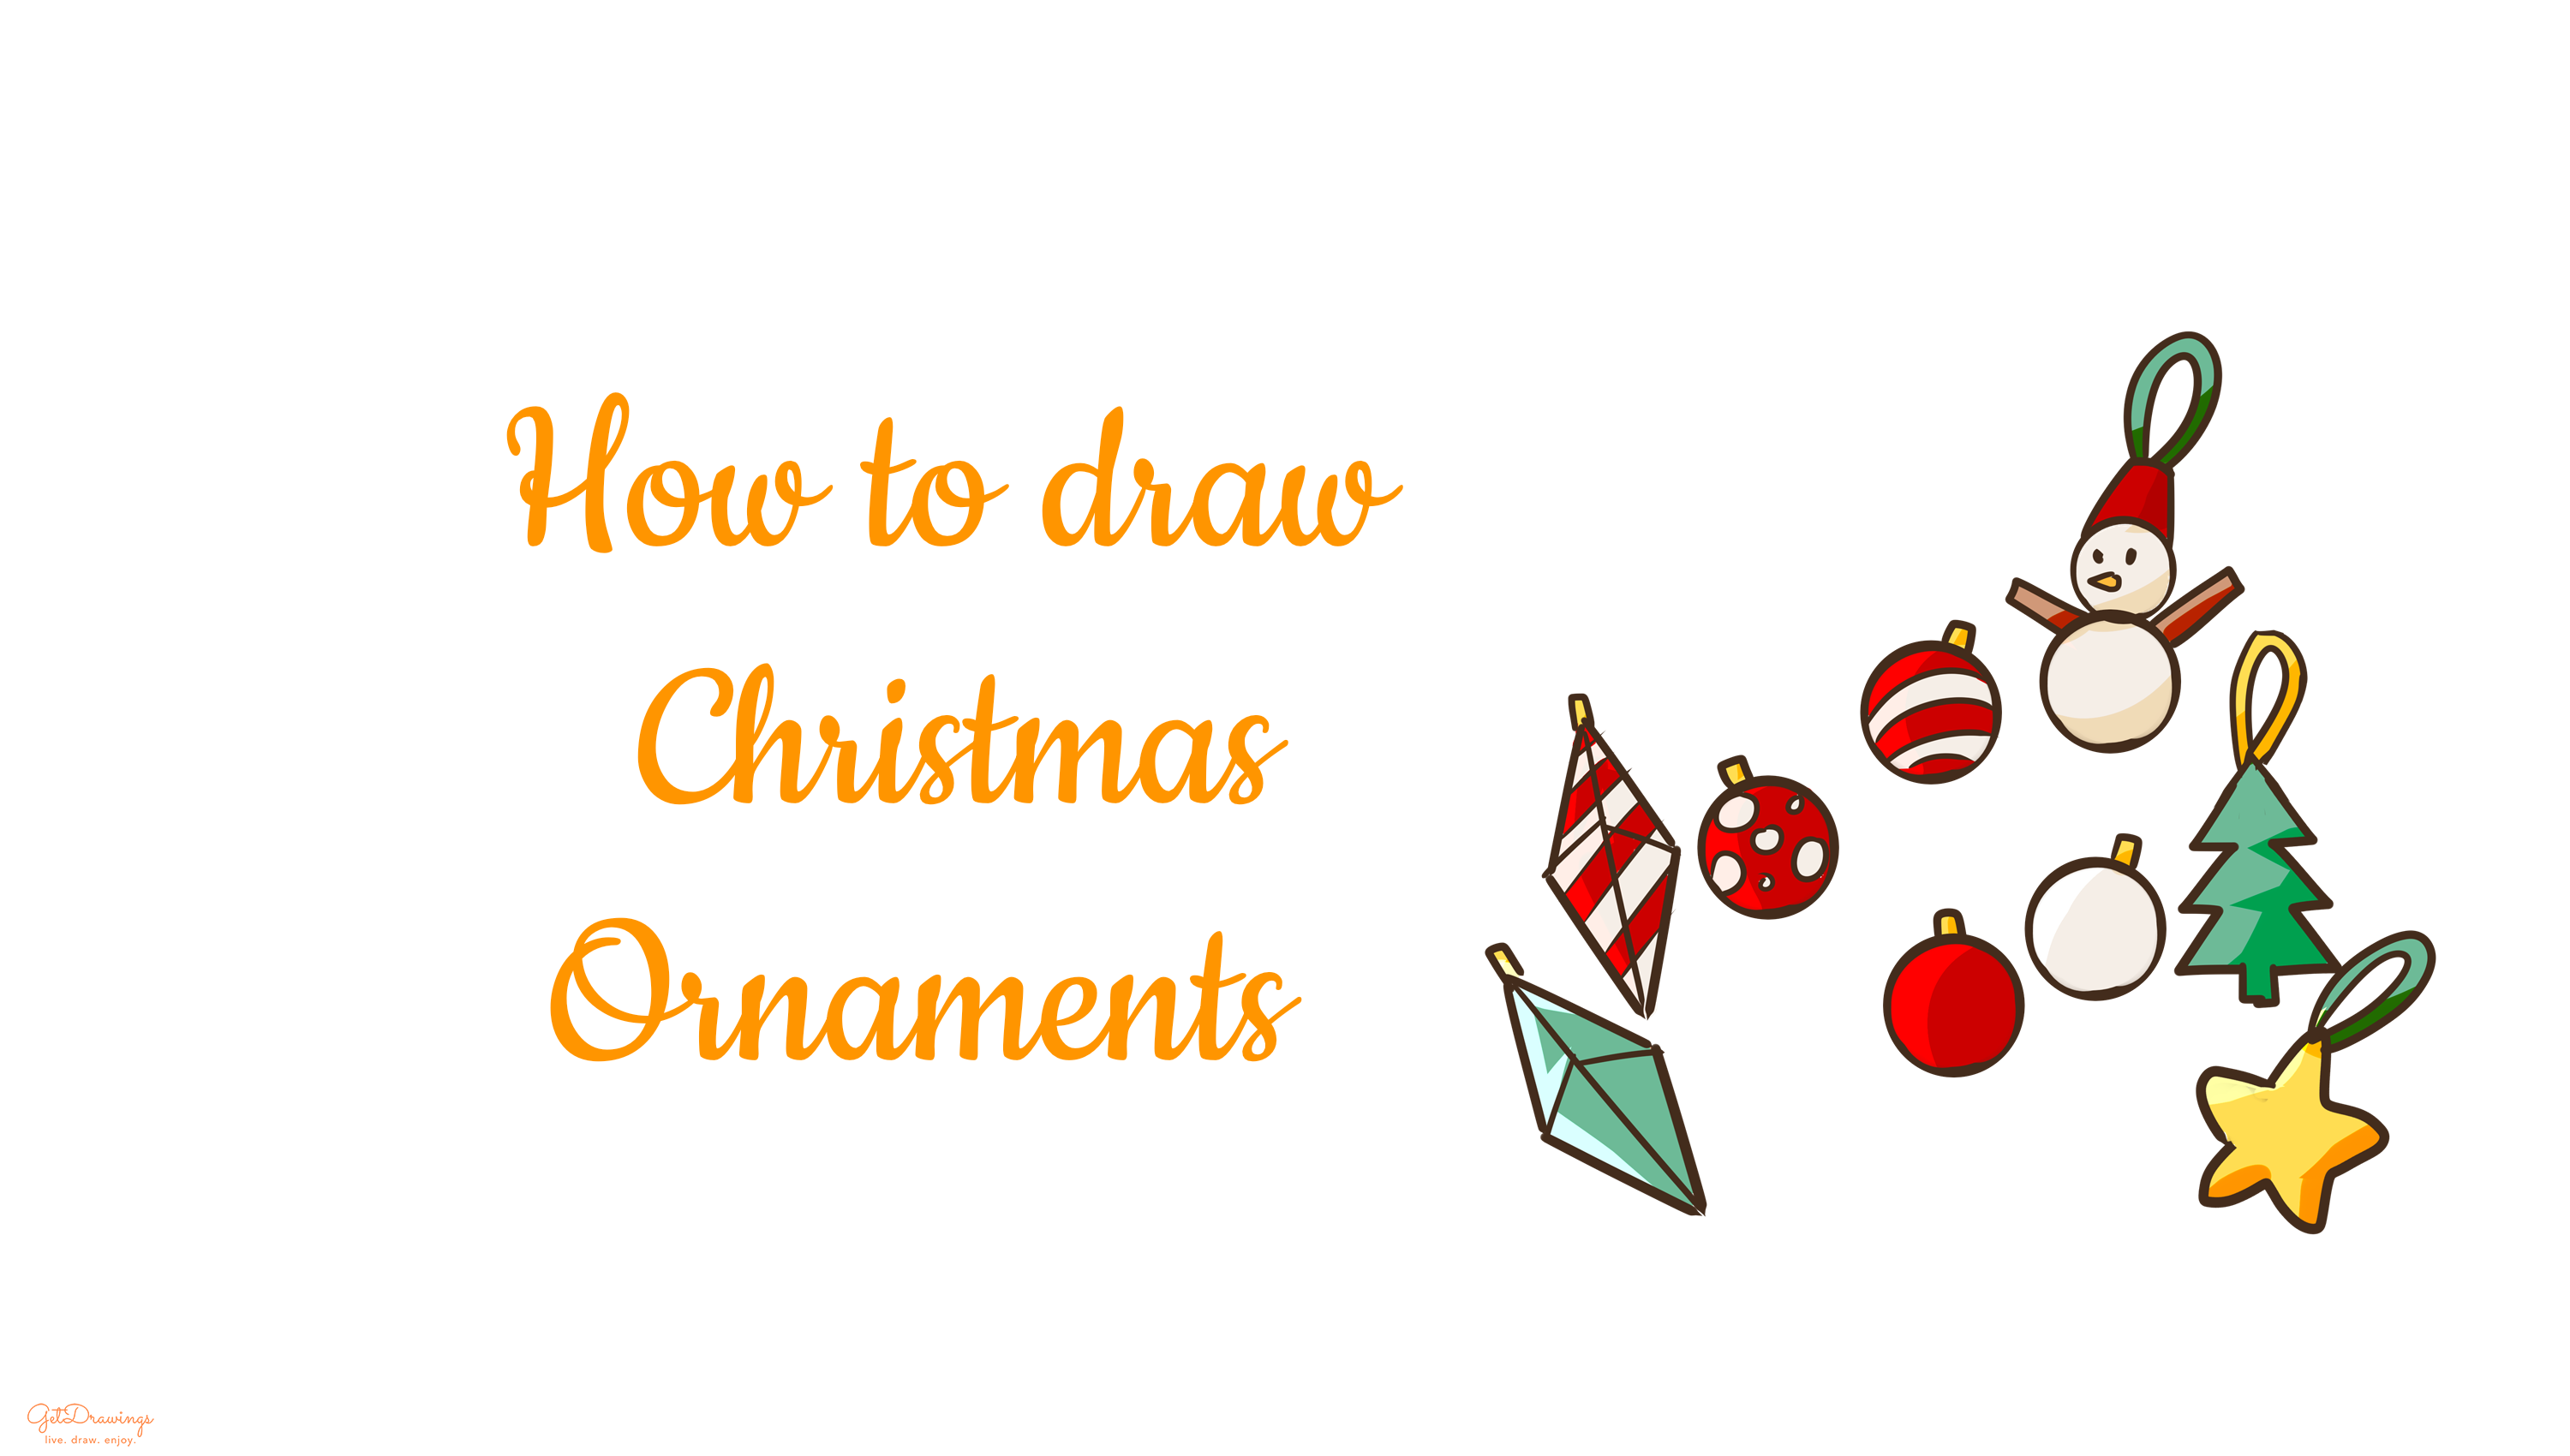 How to draw Christmas Ornaments